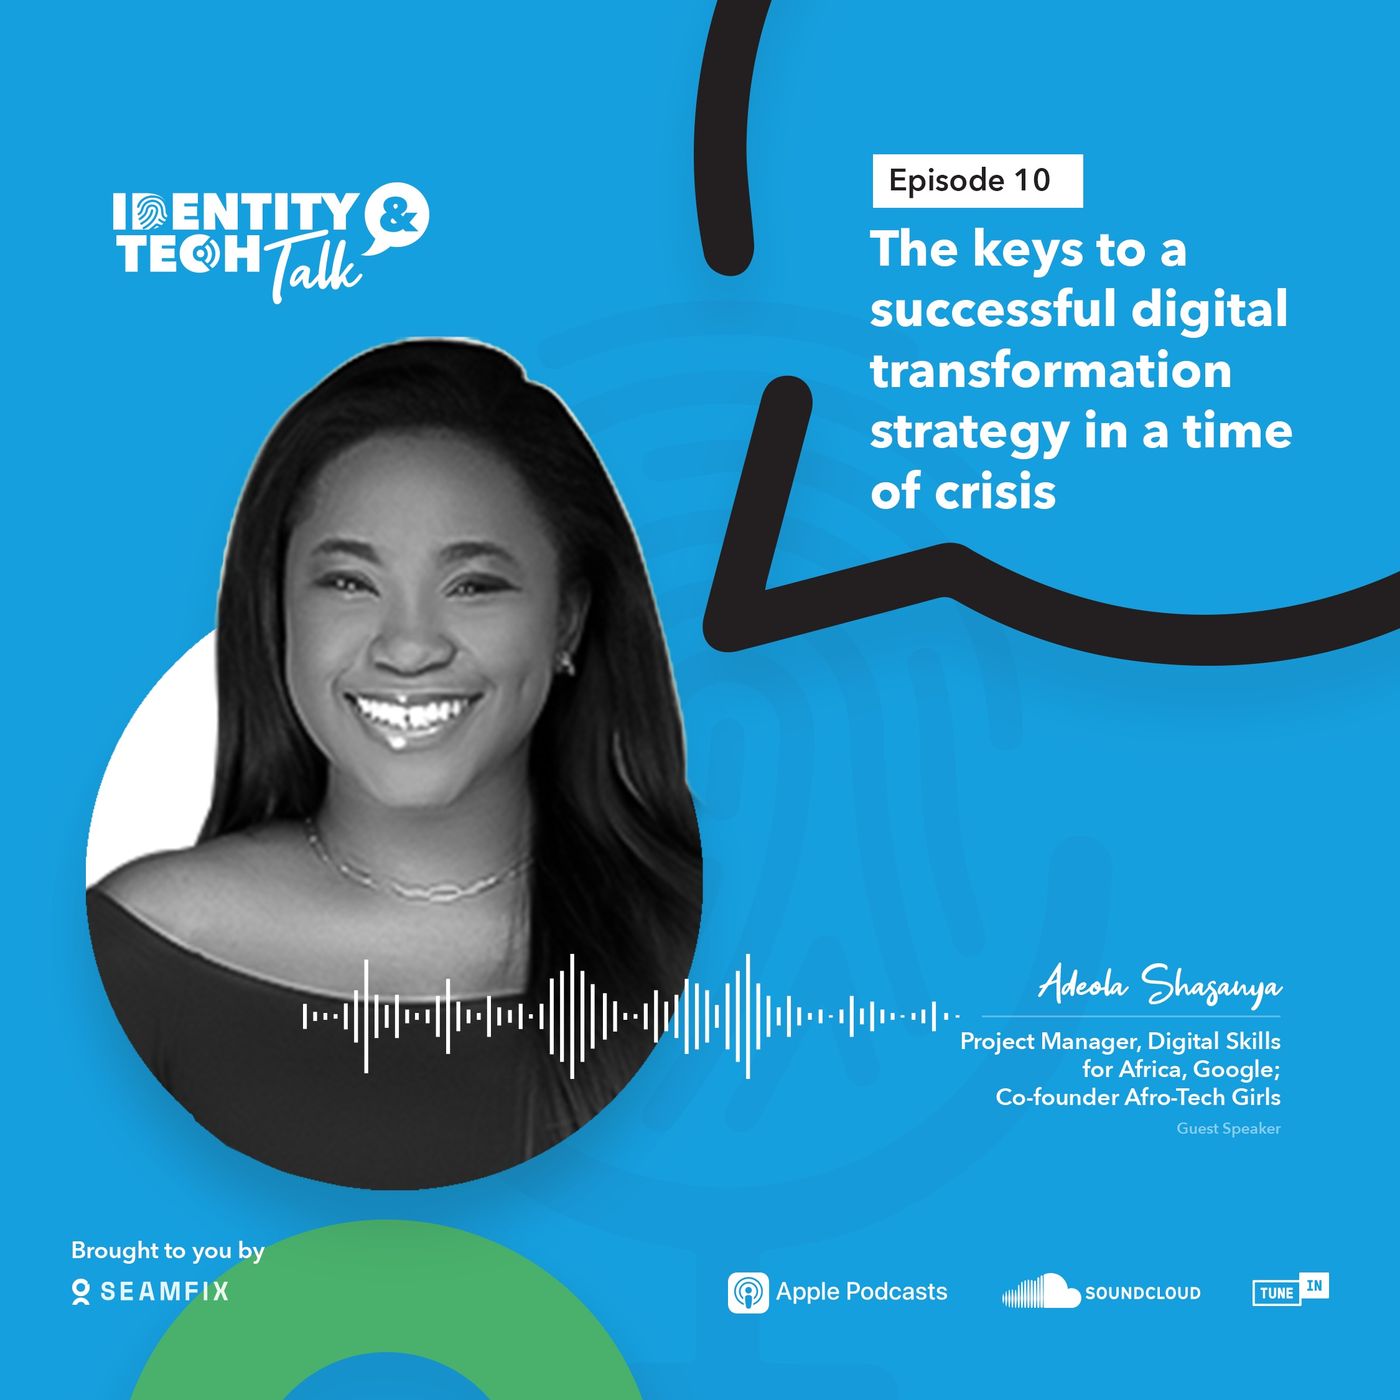 EP 10- The keys to a successful digital transformation strategy in a time of crisis